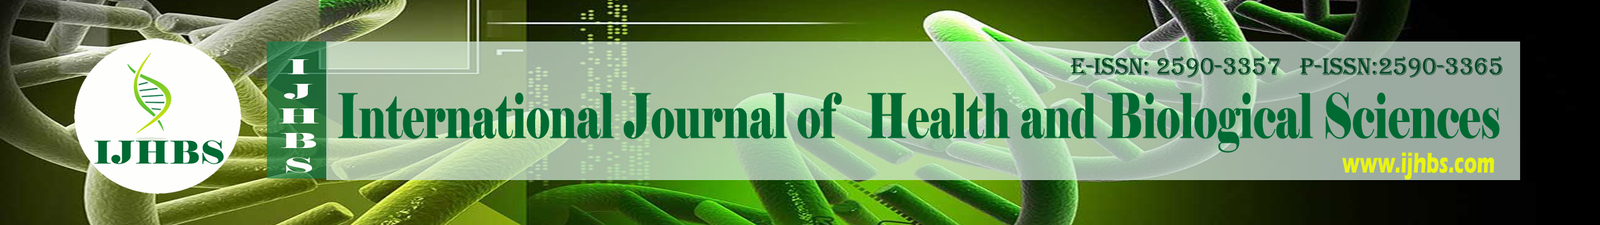 International Journal of Health and Biological Sciences